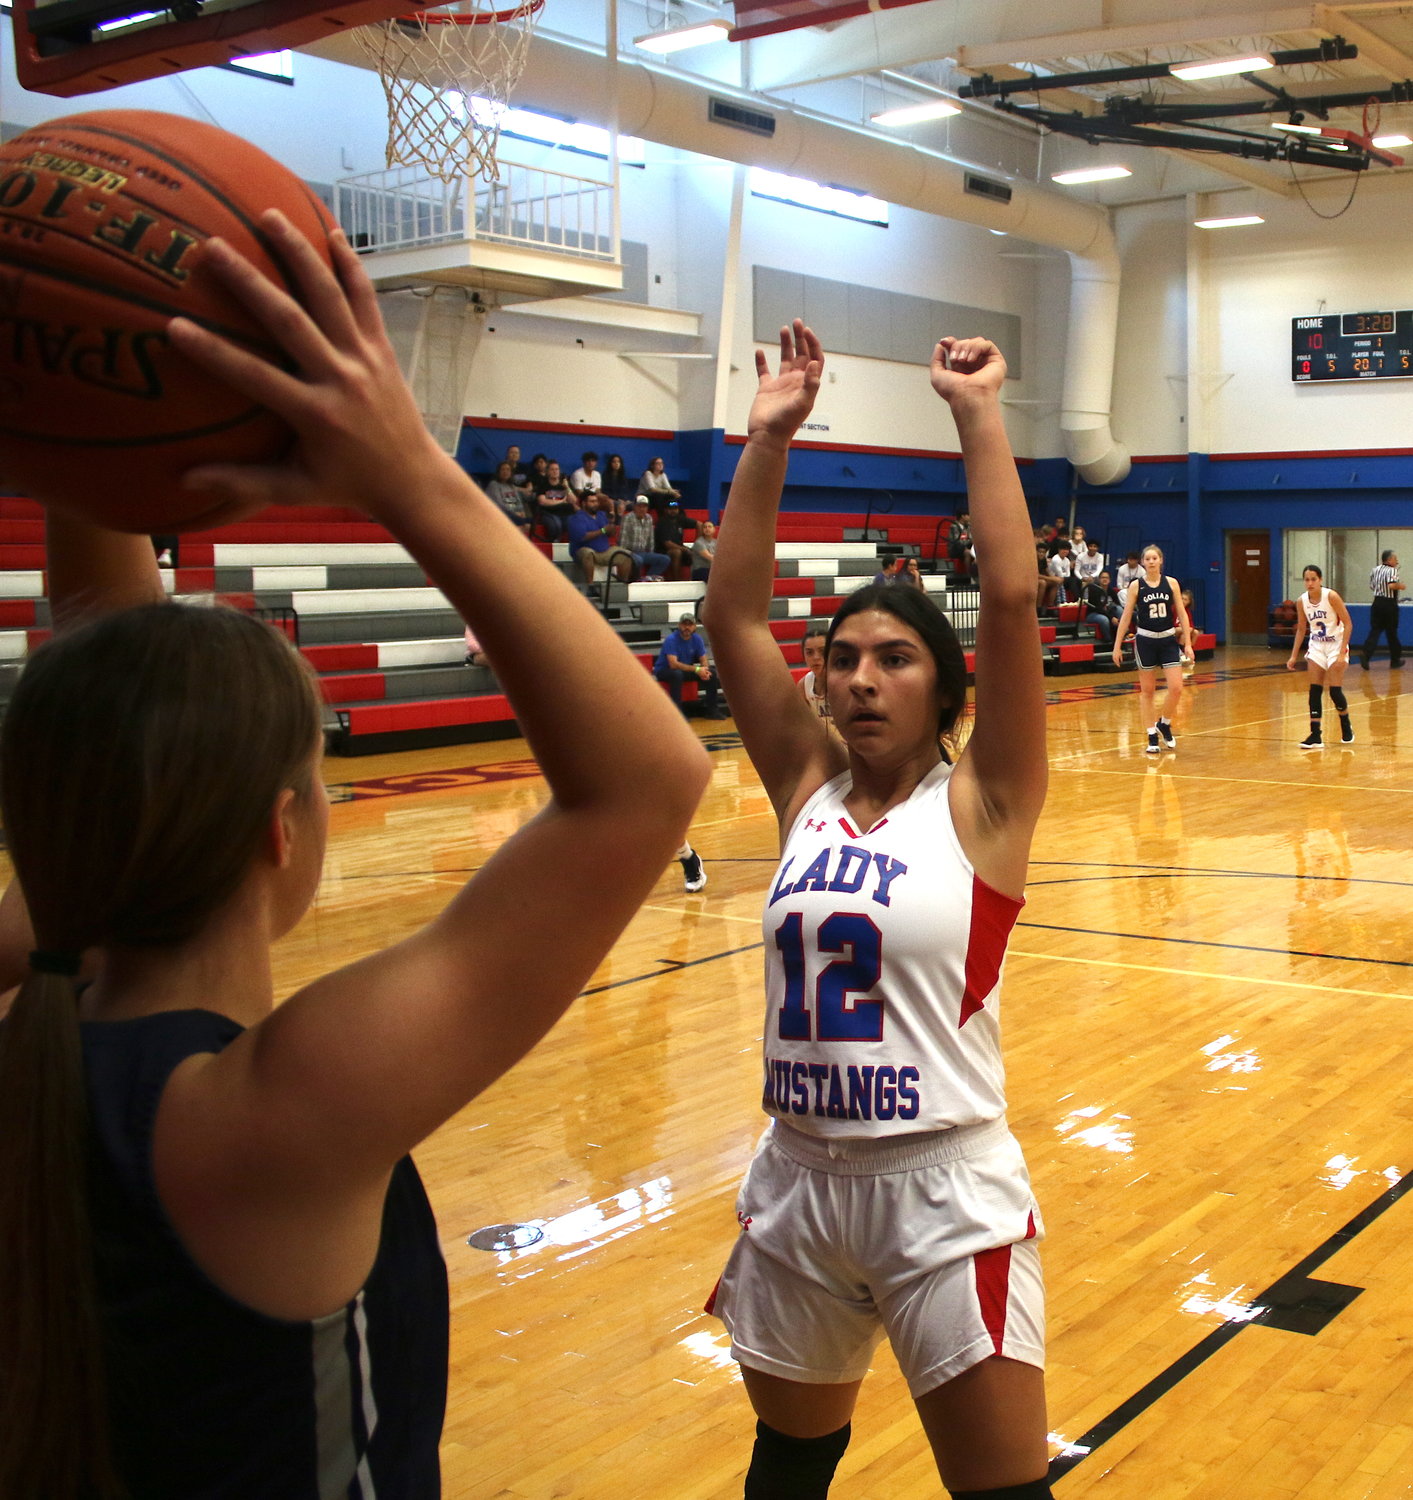 Kendall Amaya guards the inbounds pass by a Goliad Lady Tiger in the second period of Tuesday's game.